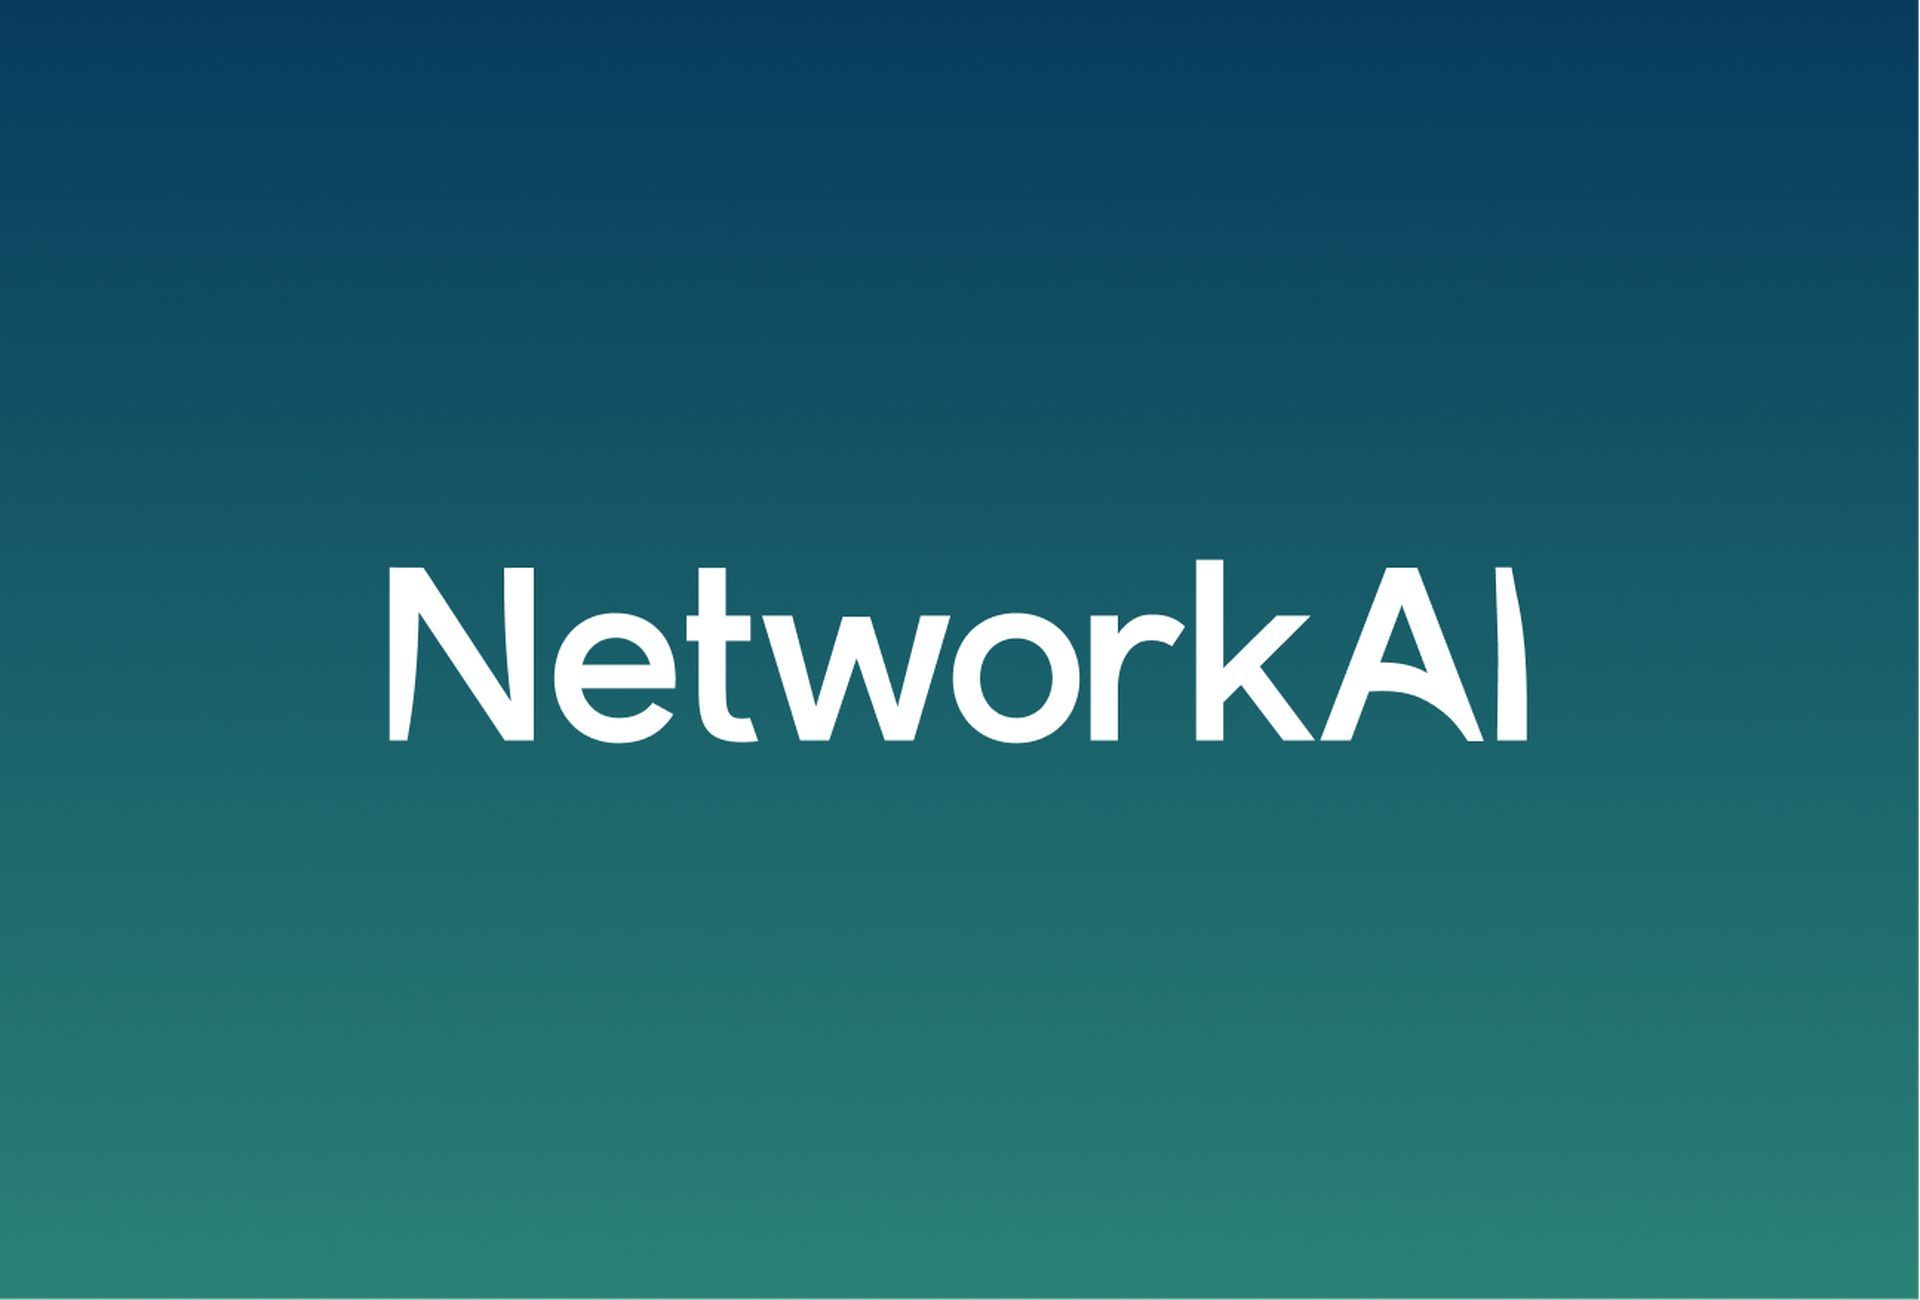 What is Network AI? Wonsulting has various AI tools for professionals, such as: Resume AI, Cover Letter AI, and Network AI. Keep reading and learn